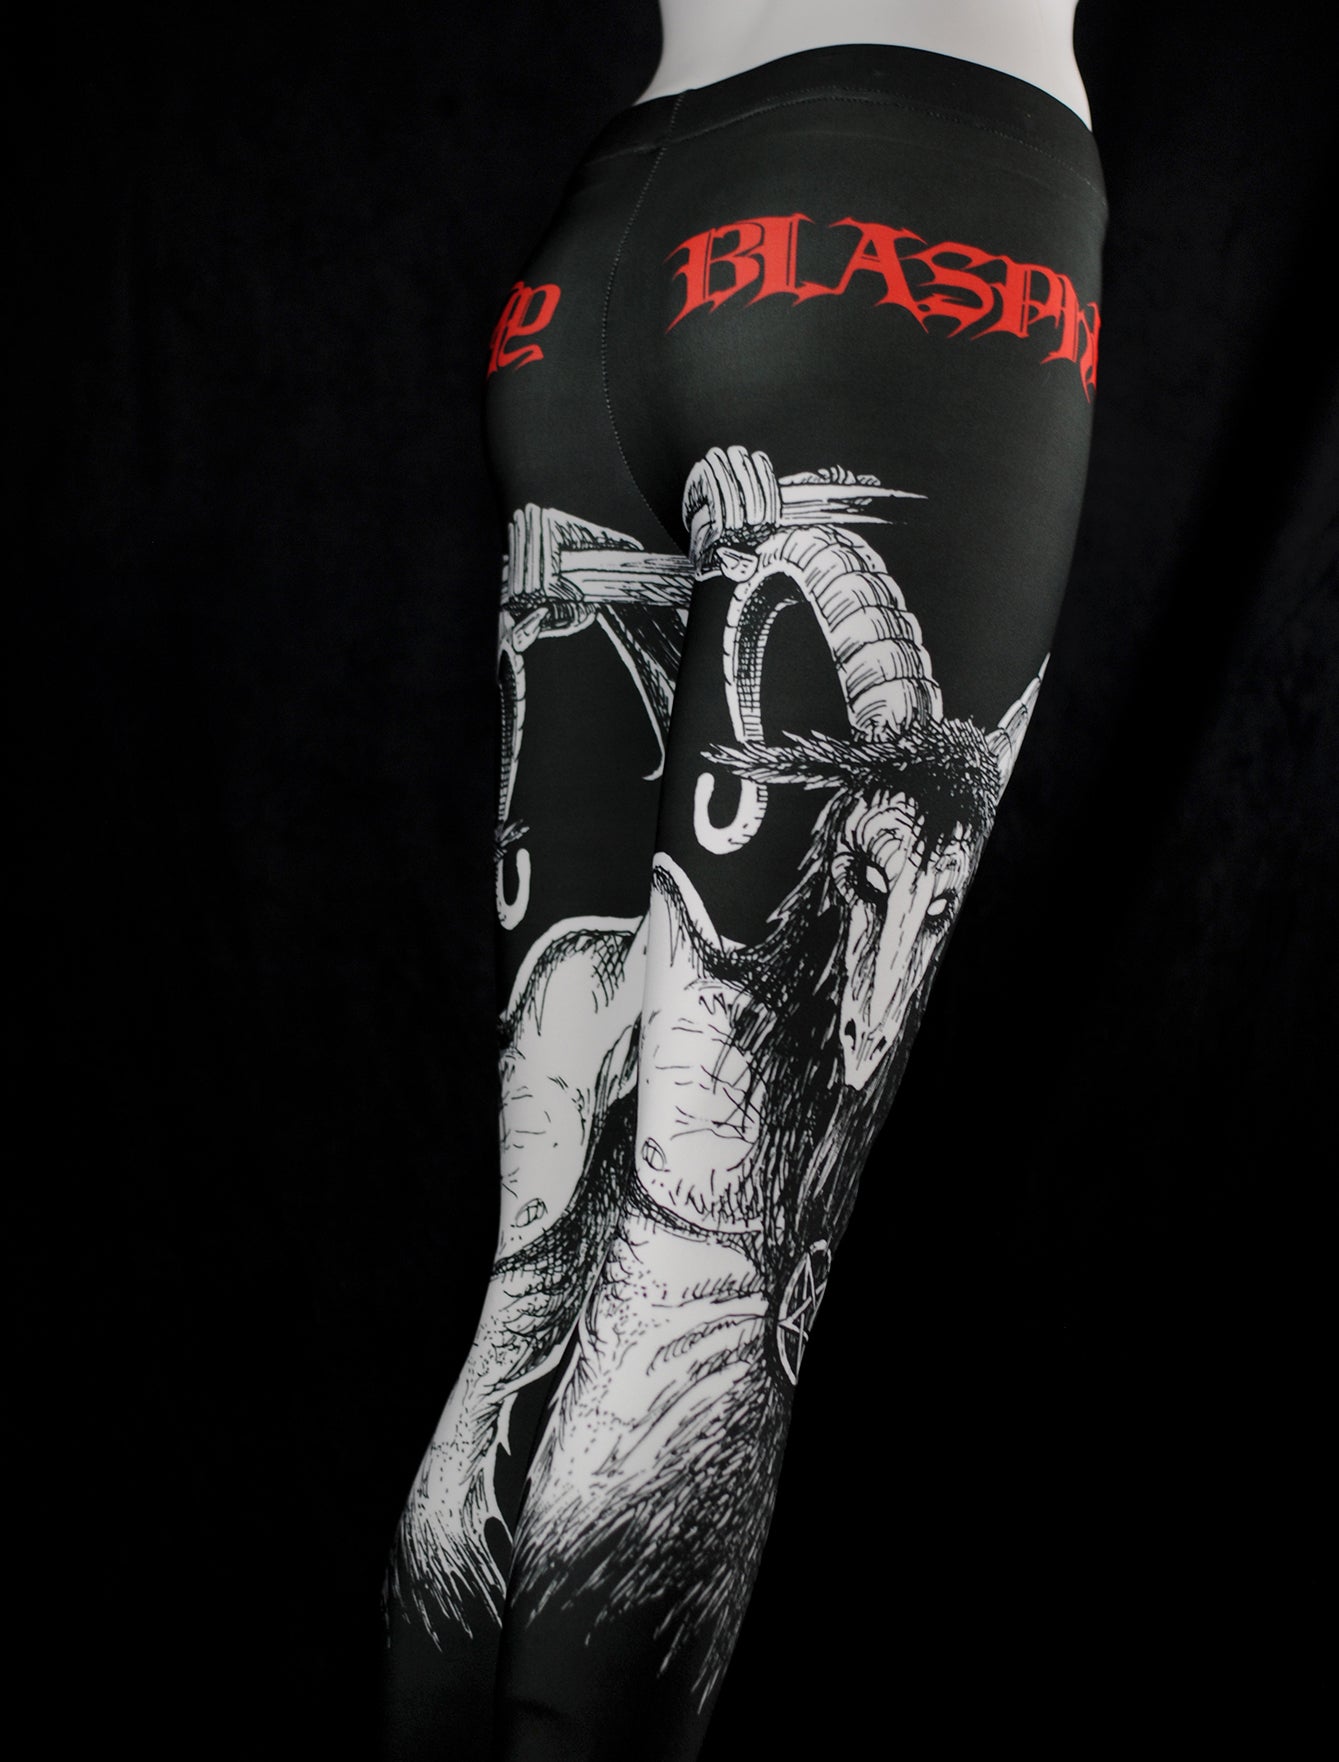 Blasphemy - Victory (Son of the Damned) Official Leggings by Metal Mistress